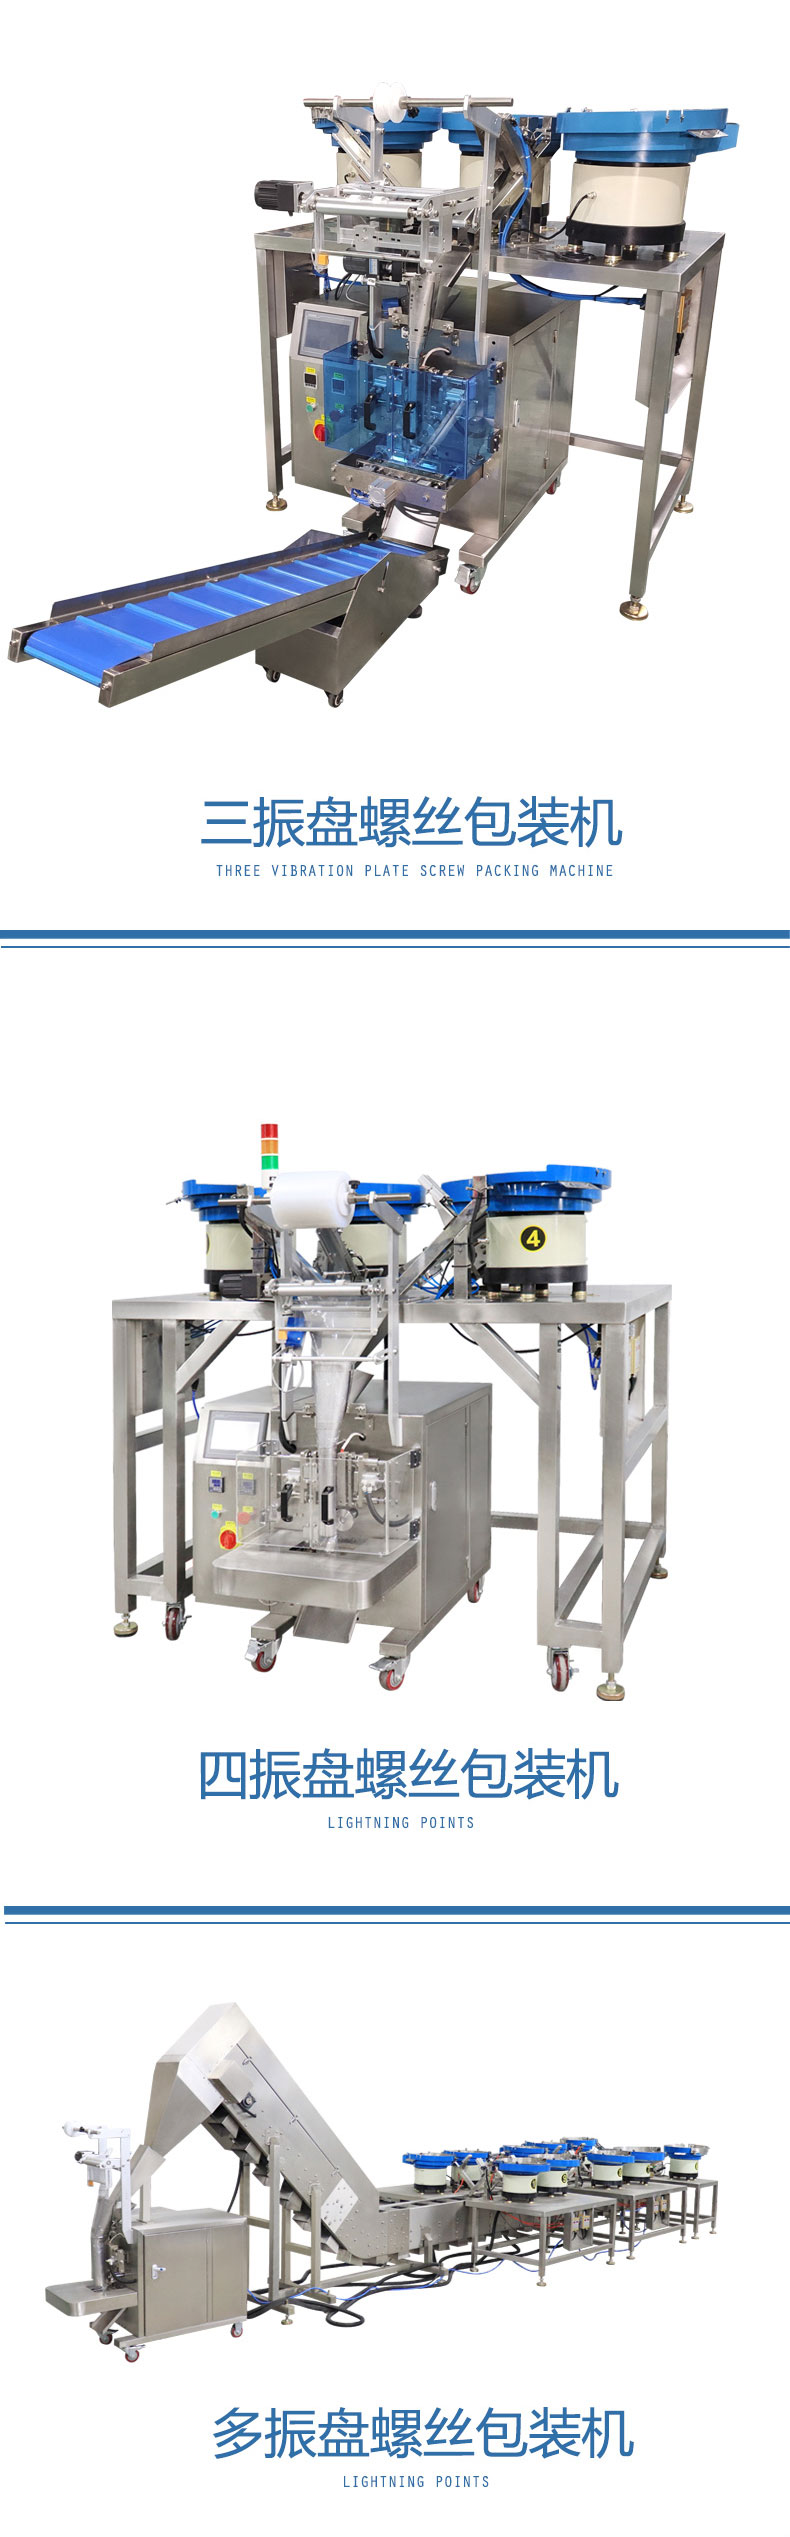 Bagged plastic bottle embryo packaging machine Test tube bottle embryo automatic counting packaging equipment Bagging machine Packaging machine